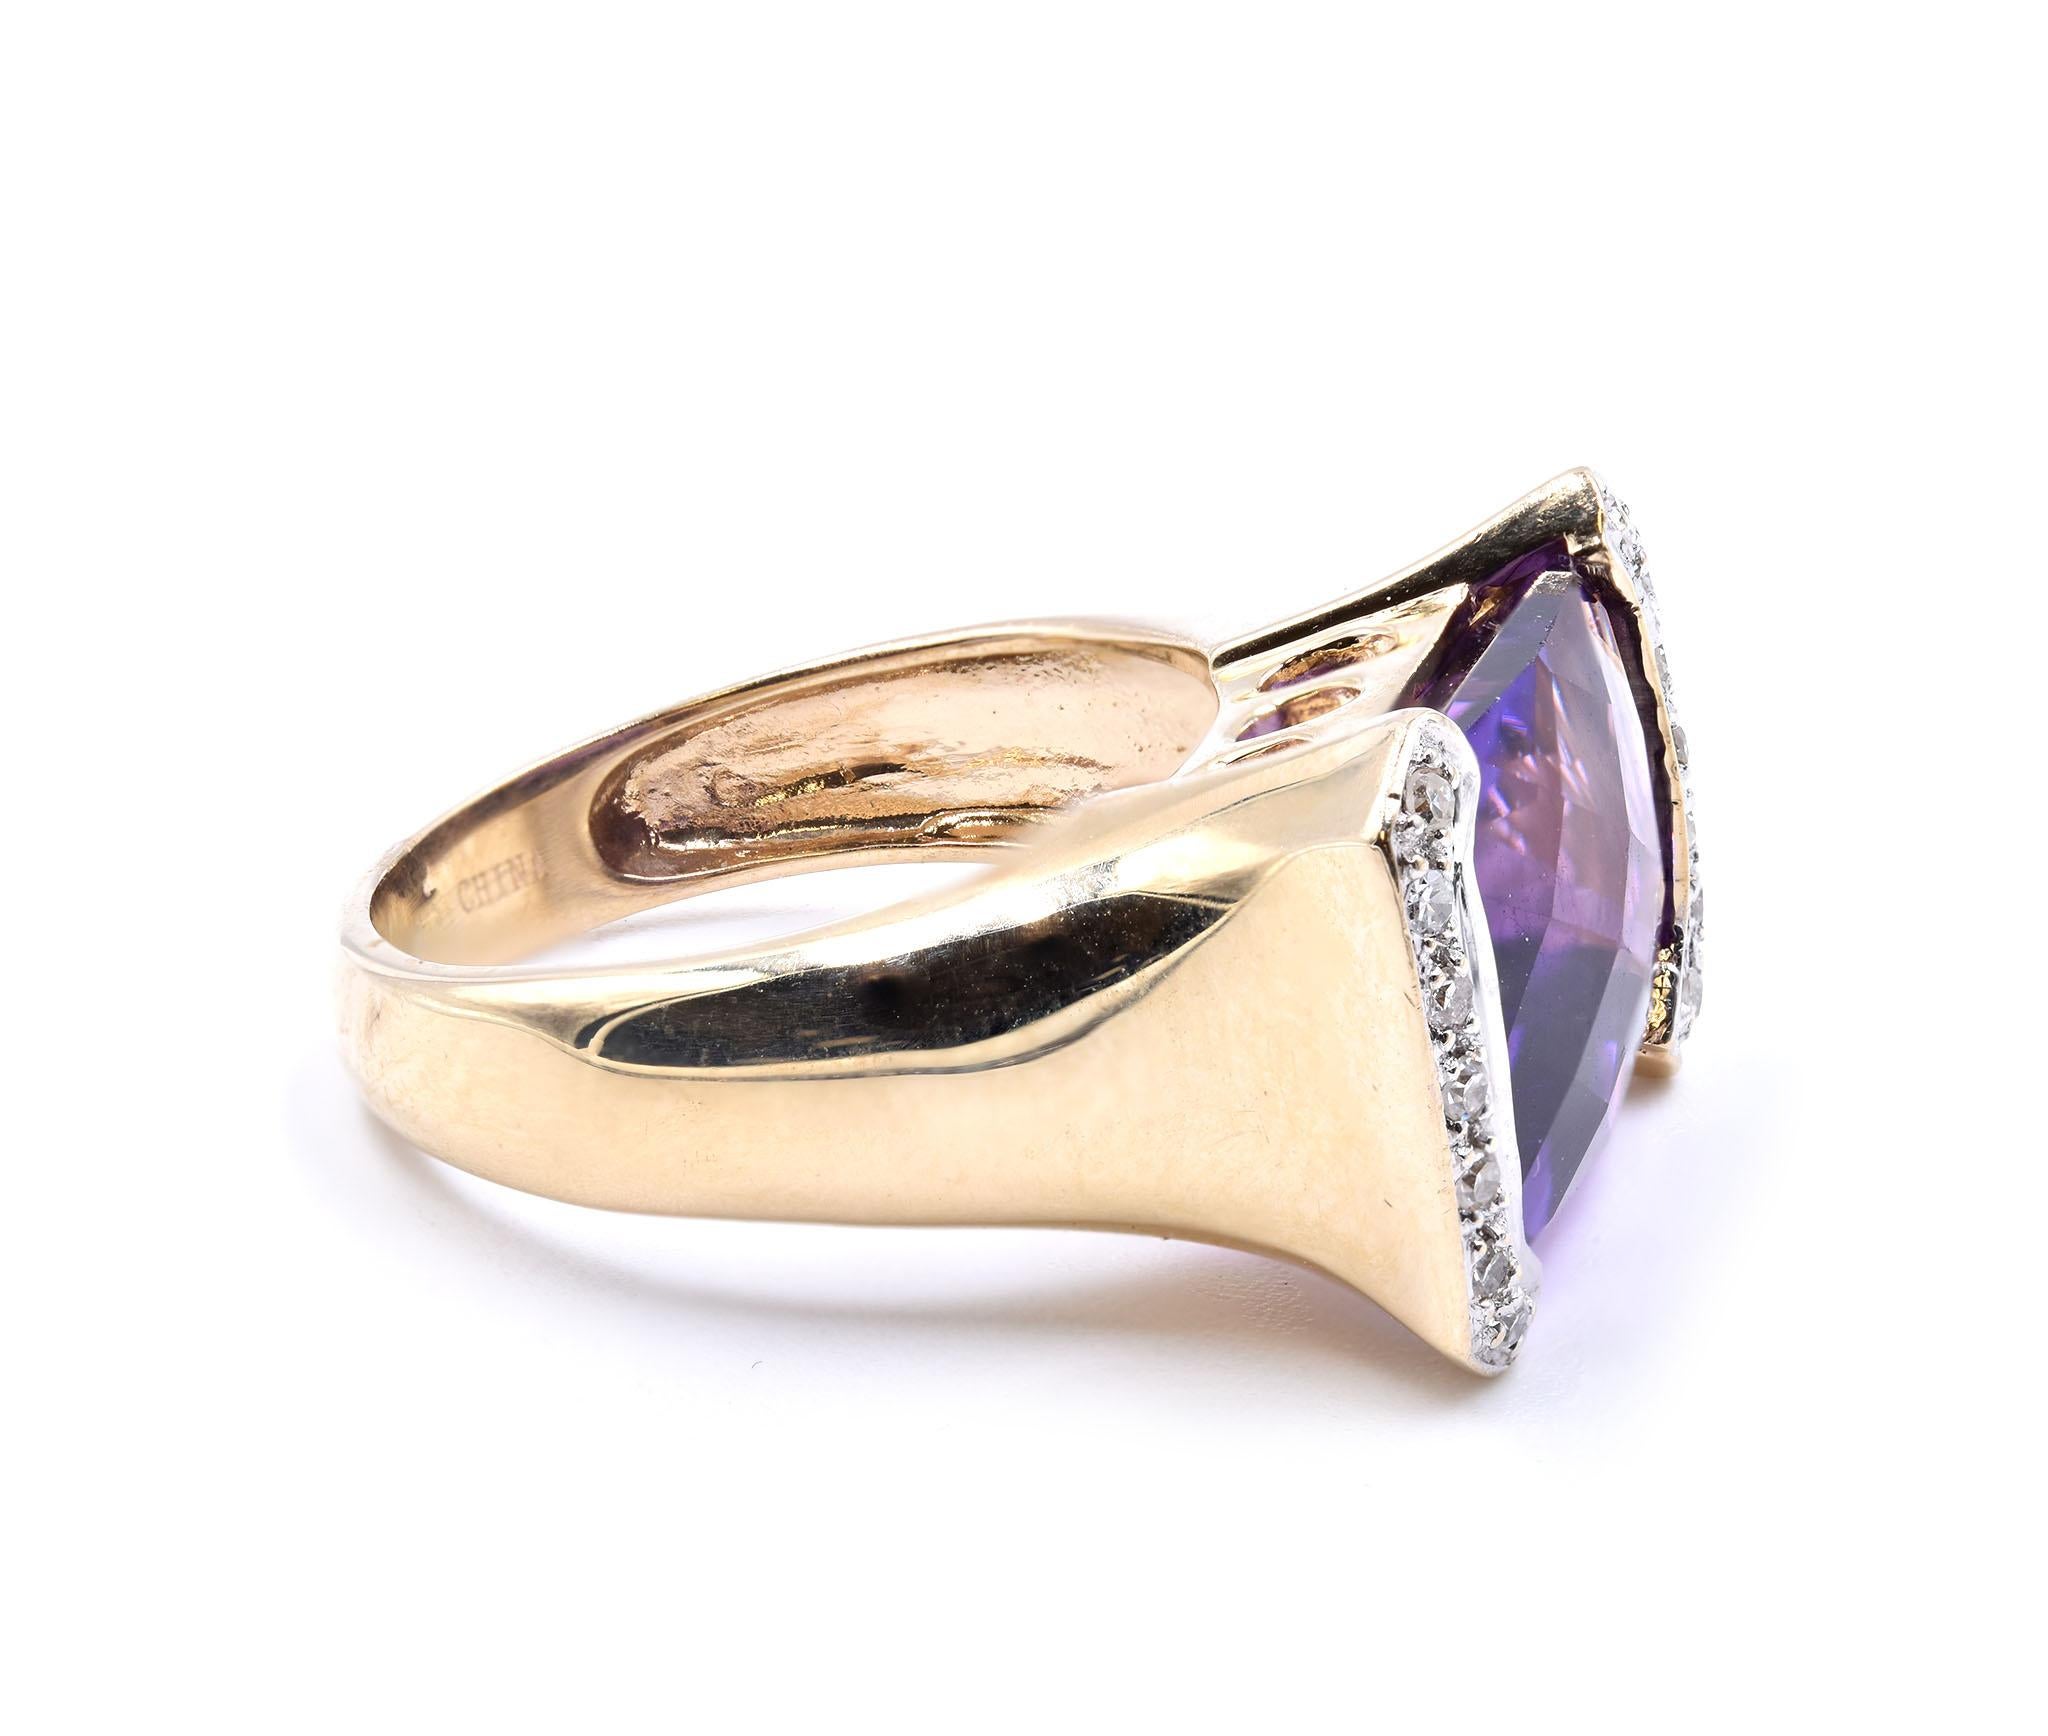 Designer: custom
Material: 14K yellow gold
Amethyst: 1 checkerboard cut = 5.60ct
Diamond: 14 round cut = .21cttw
Color: H
Clarity: SI1
Ring Size: 5.75 (please allow up to additional business days for sizing requests)
Dimensions: ring top measures